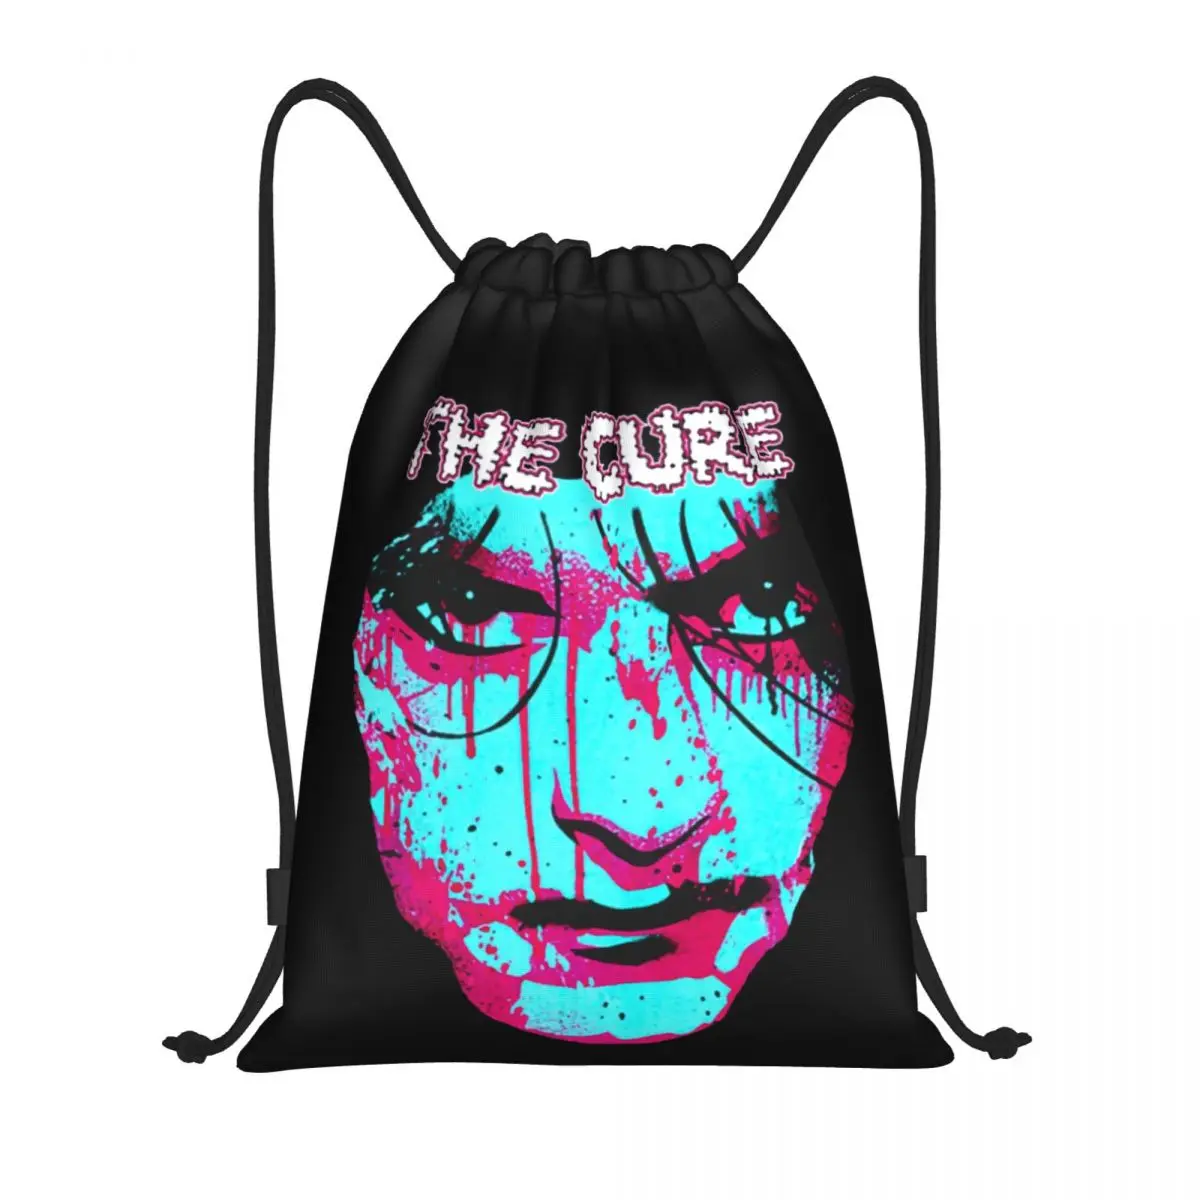 

The Cure Robert Smith 29 Drawstring Bags Gym Bag Novelty Field pack Retro Sports activities Backpack Humor Graphic